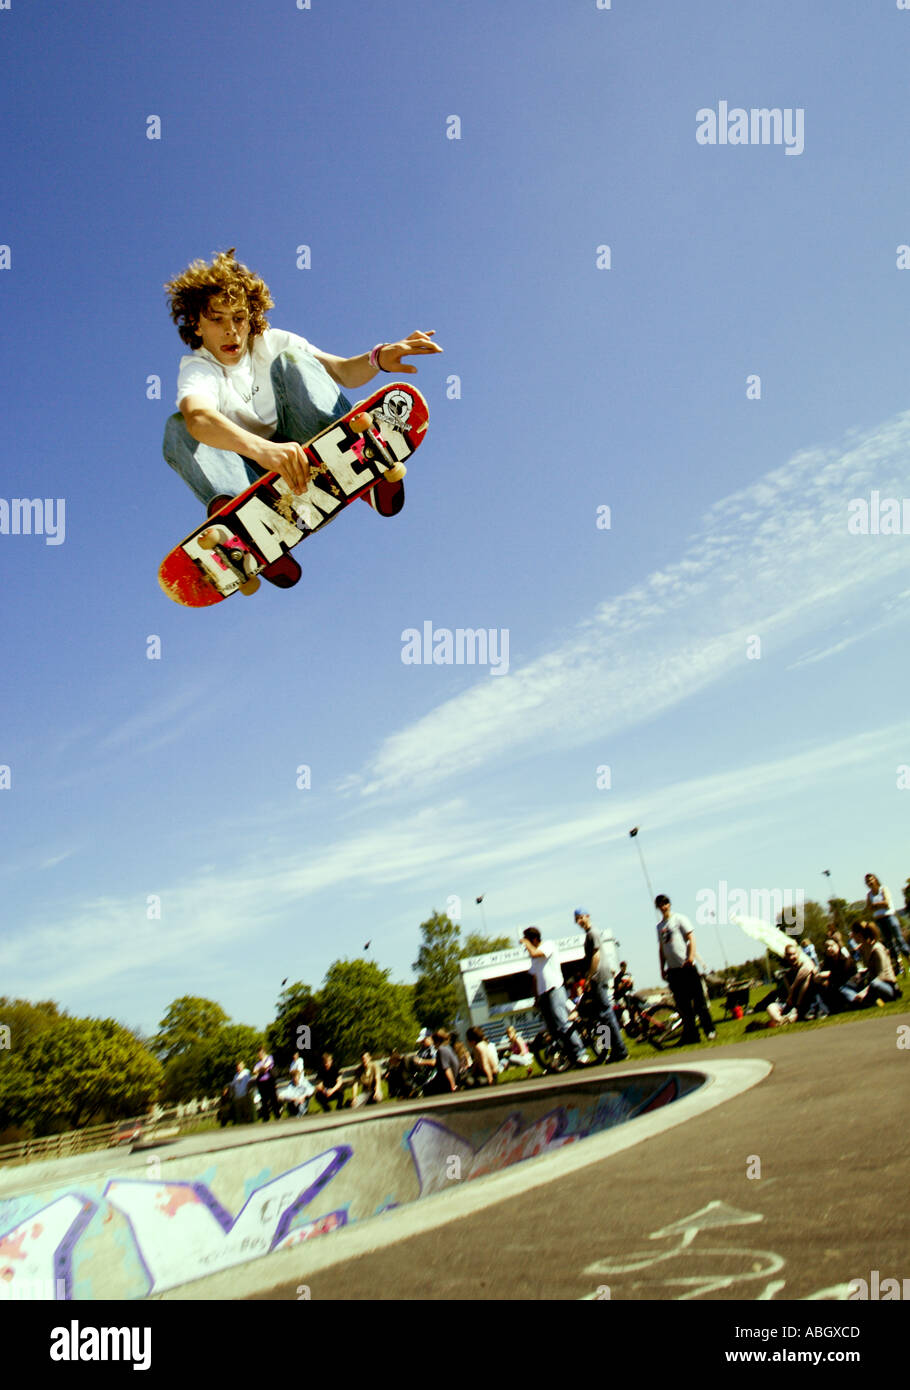 Skateboarder pulling some big air out of a bowl Stock Photo - Alamy